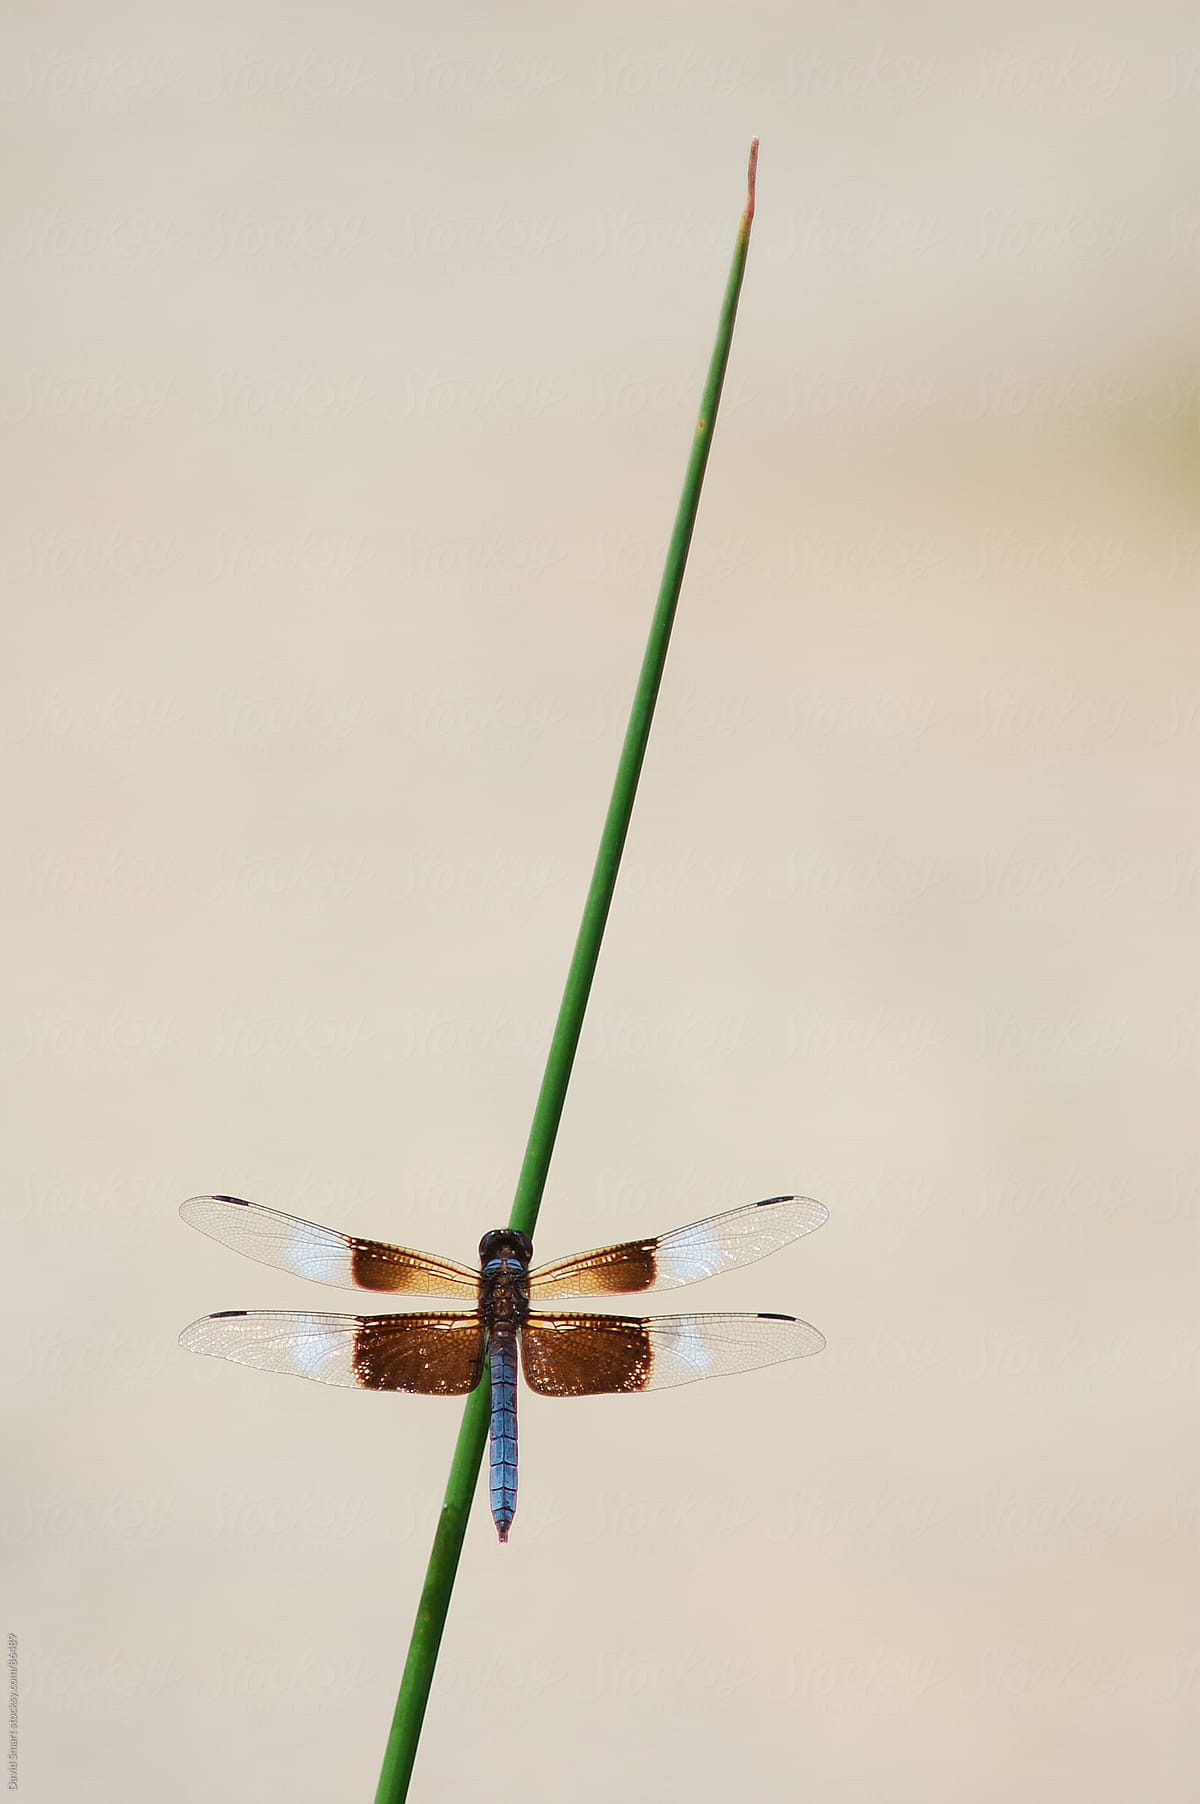 Widow Skimmer dragonfly on a reed